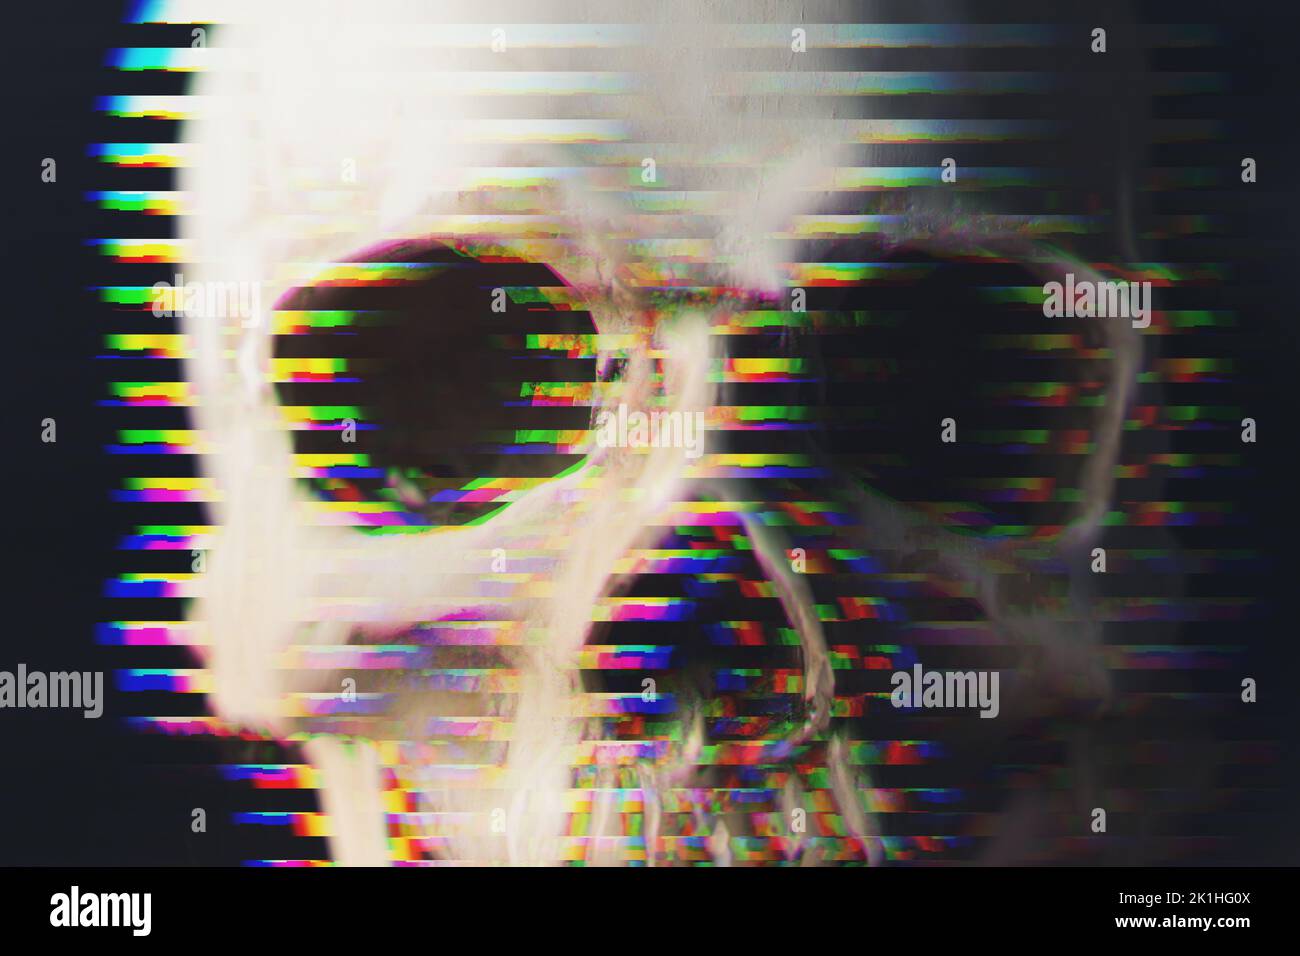 Death symbols concept. Closeup illustration of blurred white human skull witch colorful chromatic aberration. Black background. High quality illustration Stock Photo